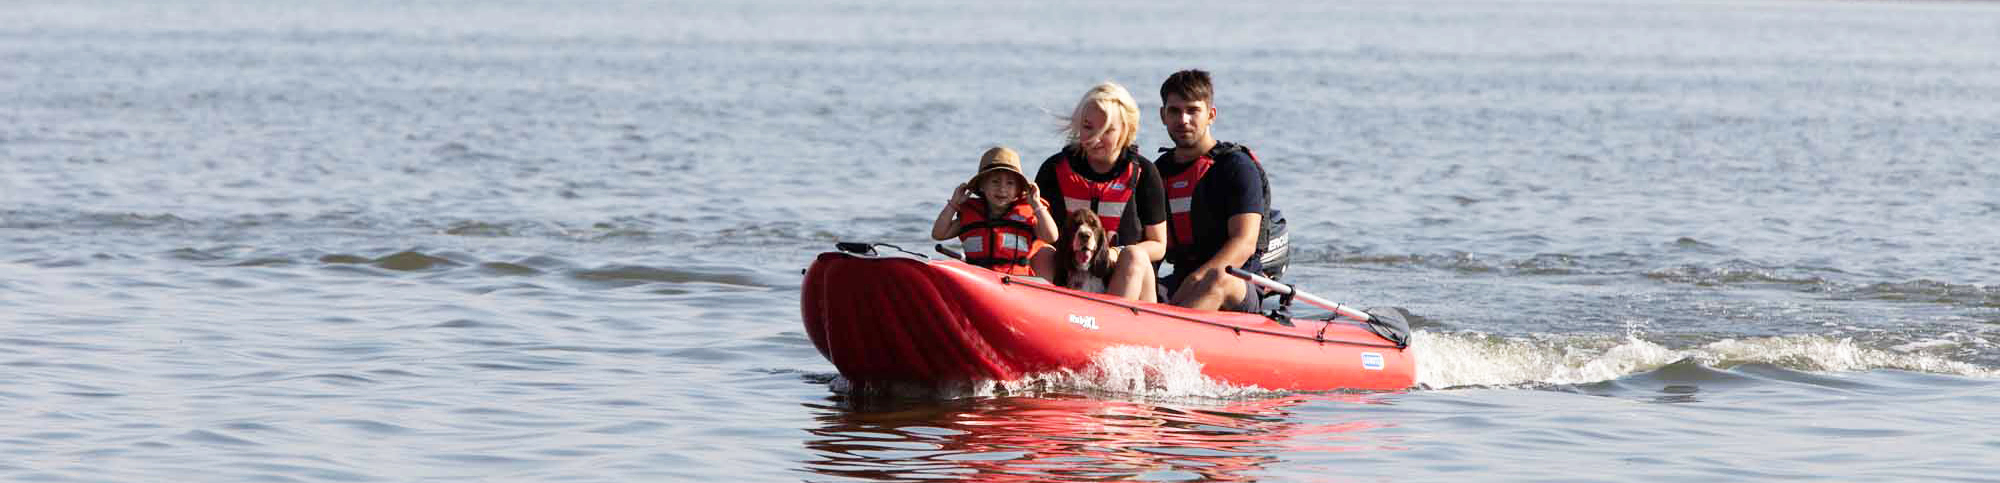 Inflatable Rafts & Boats - easy to transport and store